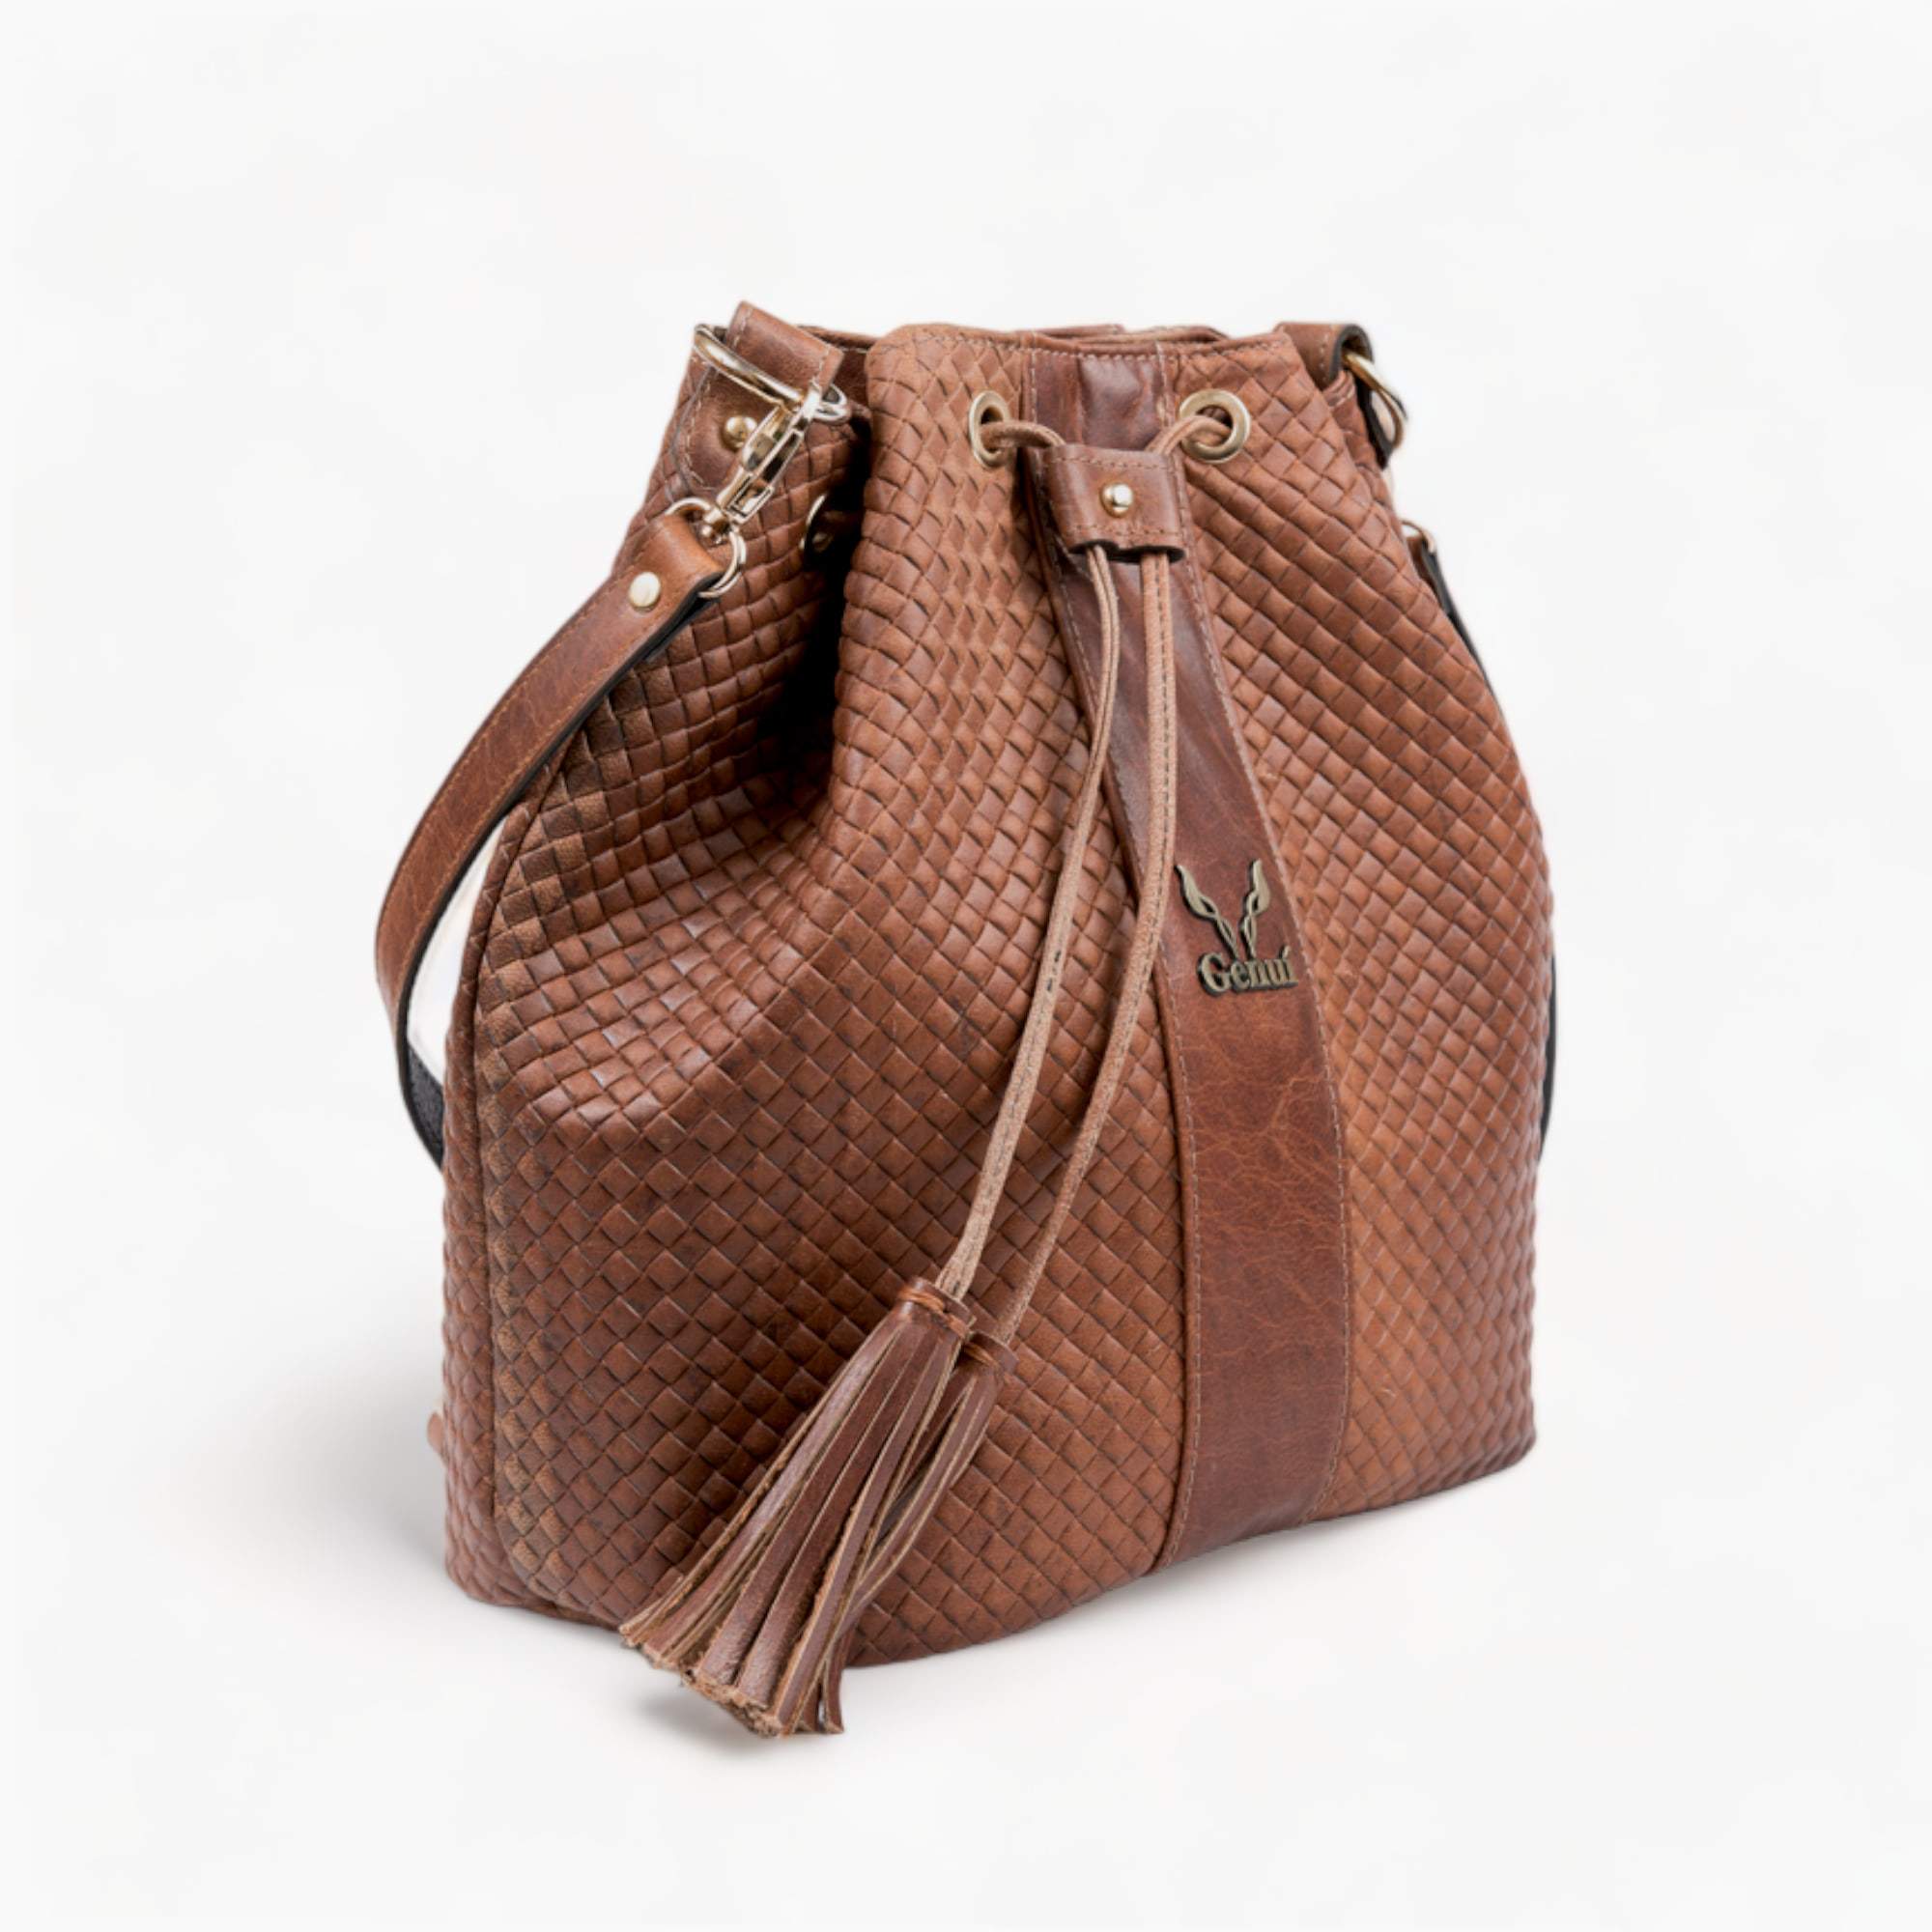 Brown leather polymorphic pouch bag in raffia pattern